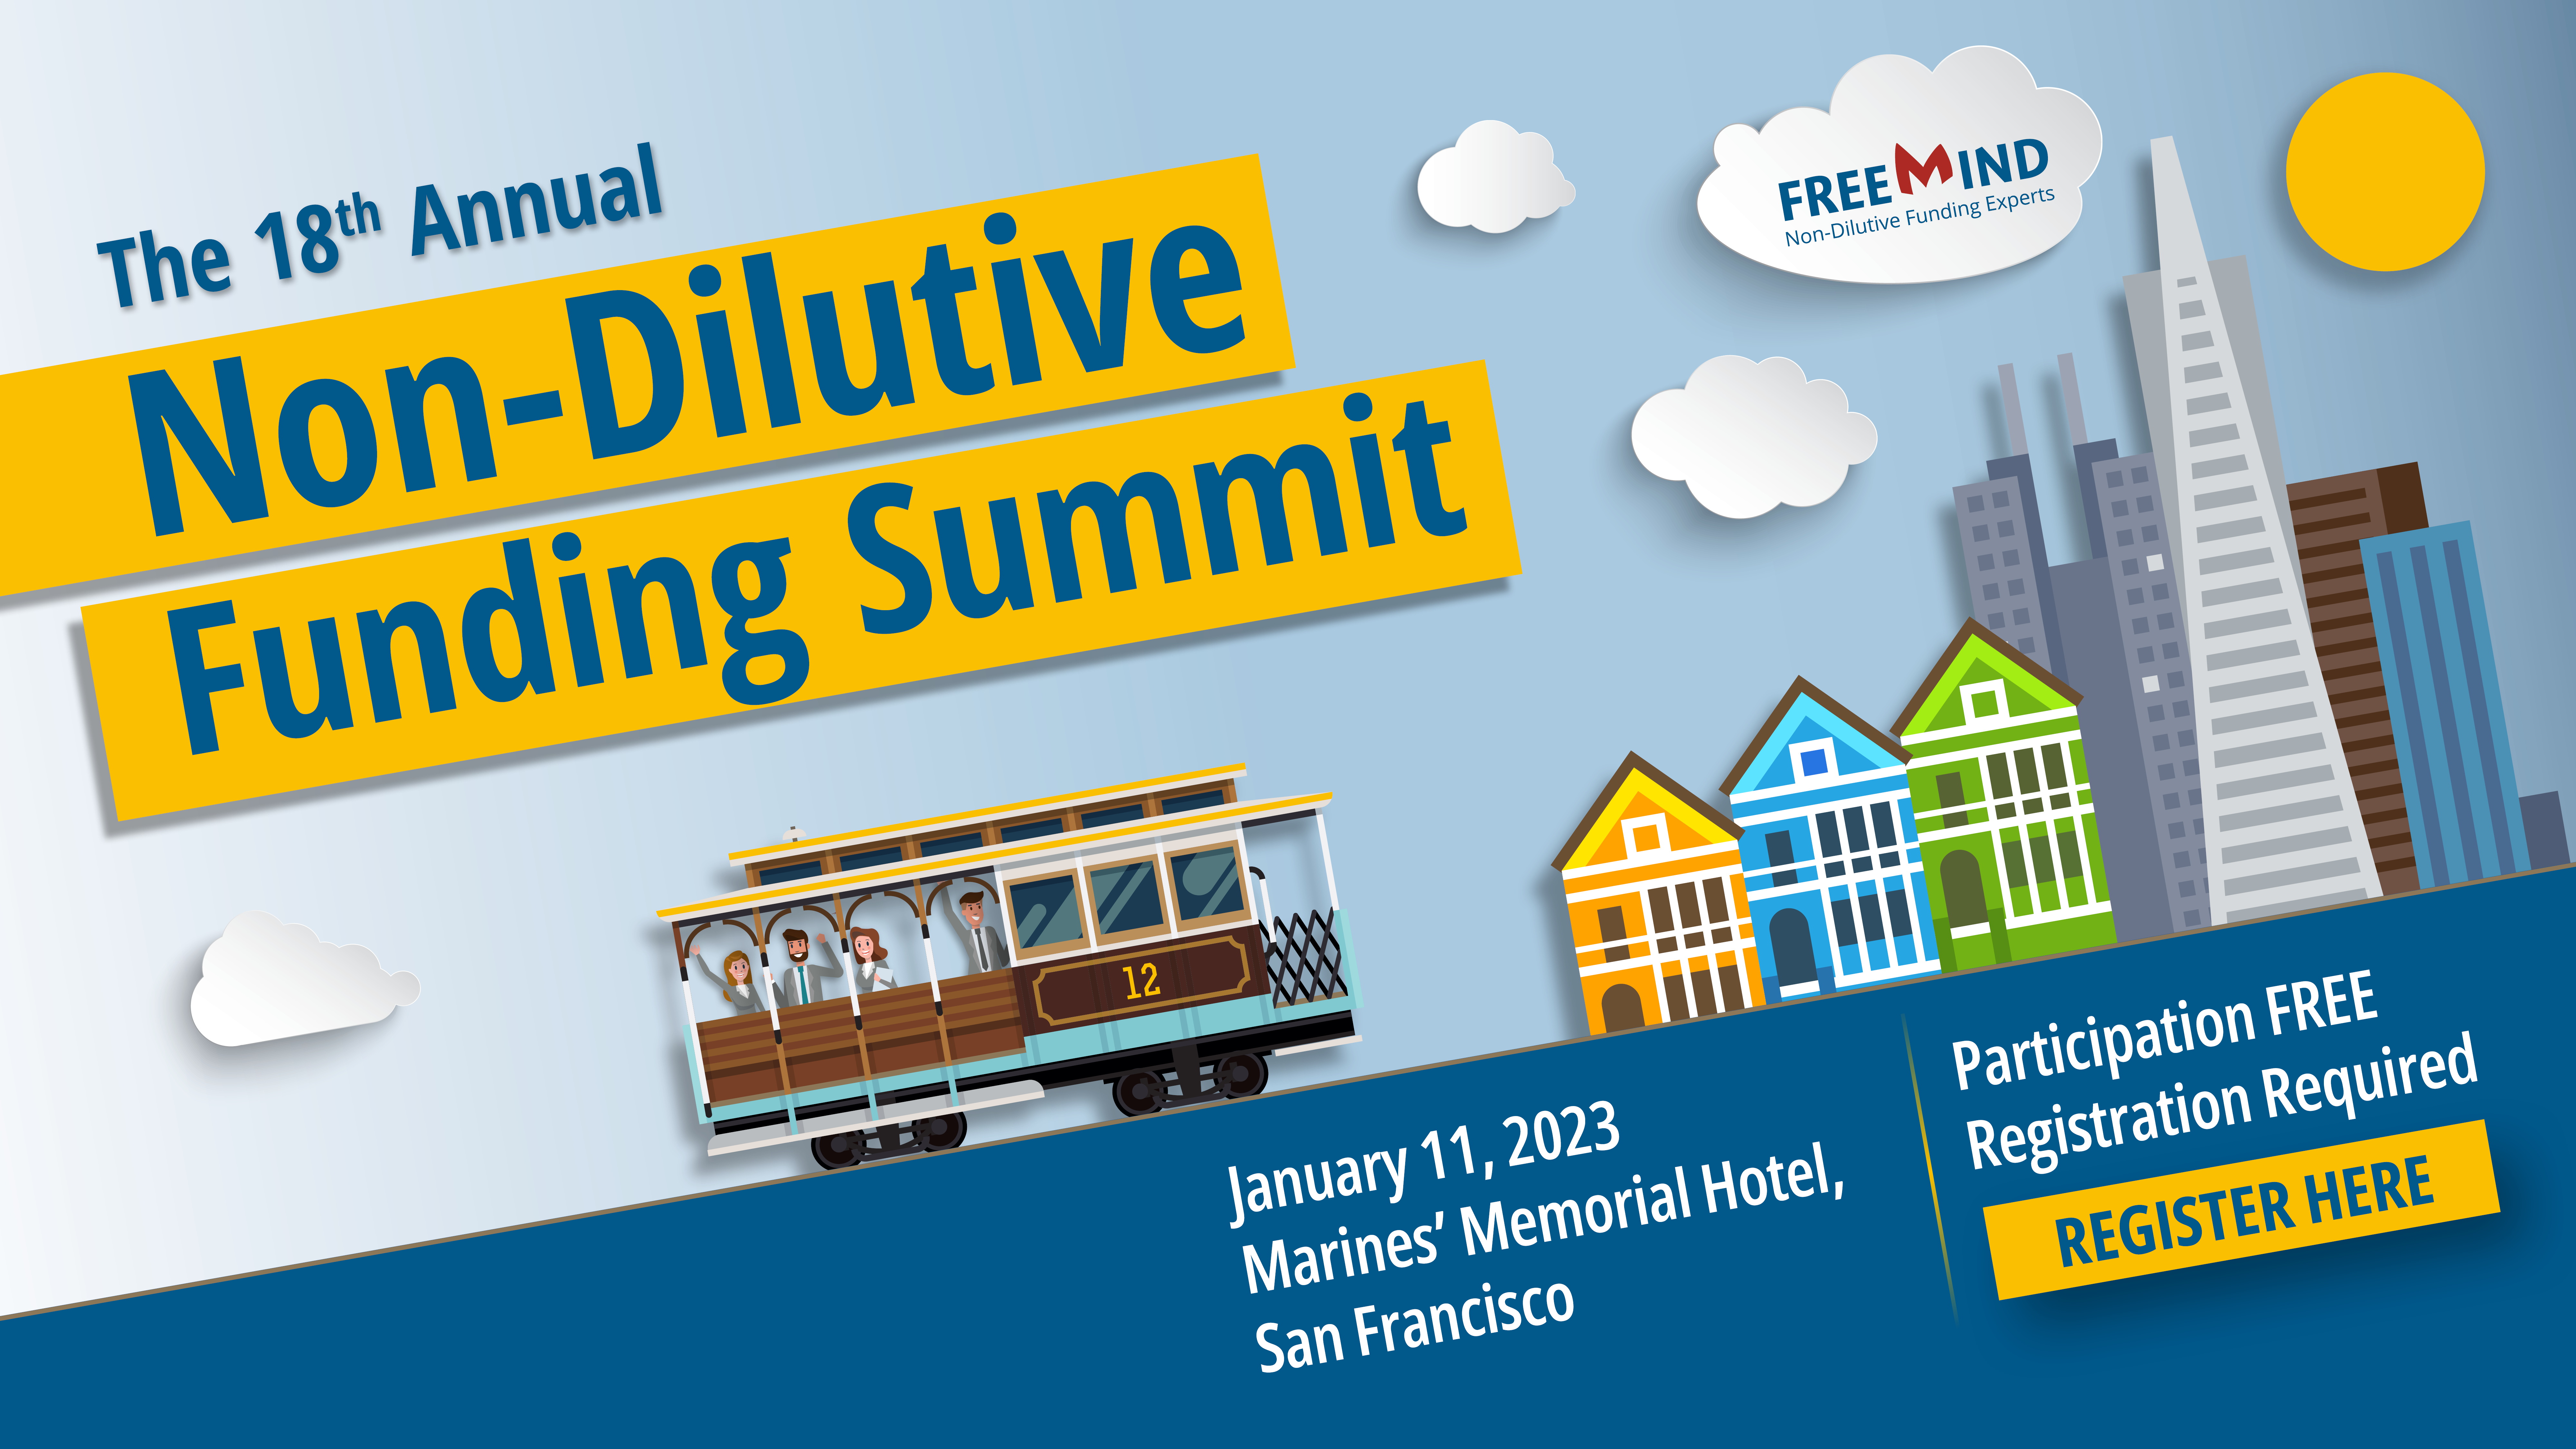 18th Annual Non-Dilutive Funding Summit Where life science executives meet with directors of top funding programs & learn more about winning non-dilutive grants & contracts. Wednesday, January 11, 2023, 8:00 AM – 4:00 PM PST. The Marines' Memorial Club & Hotel 609 Sutter Street San Francisco.